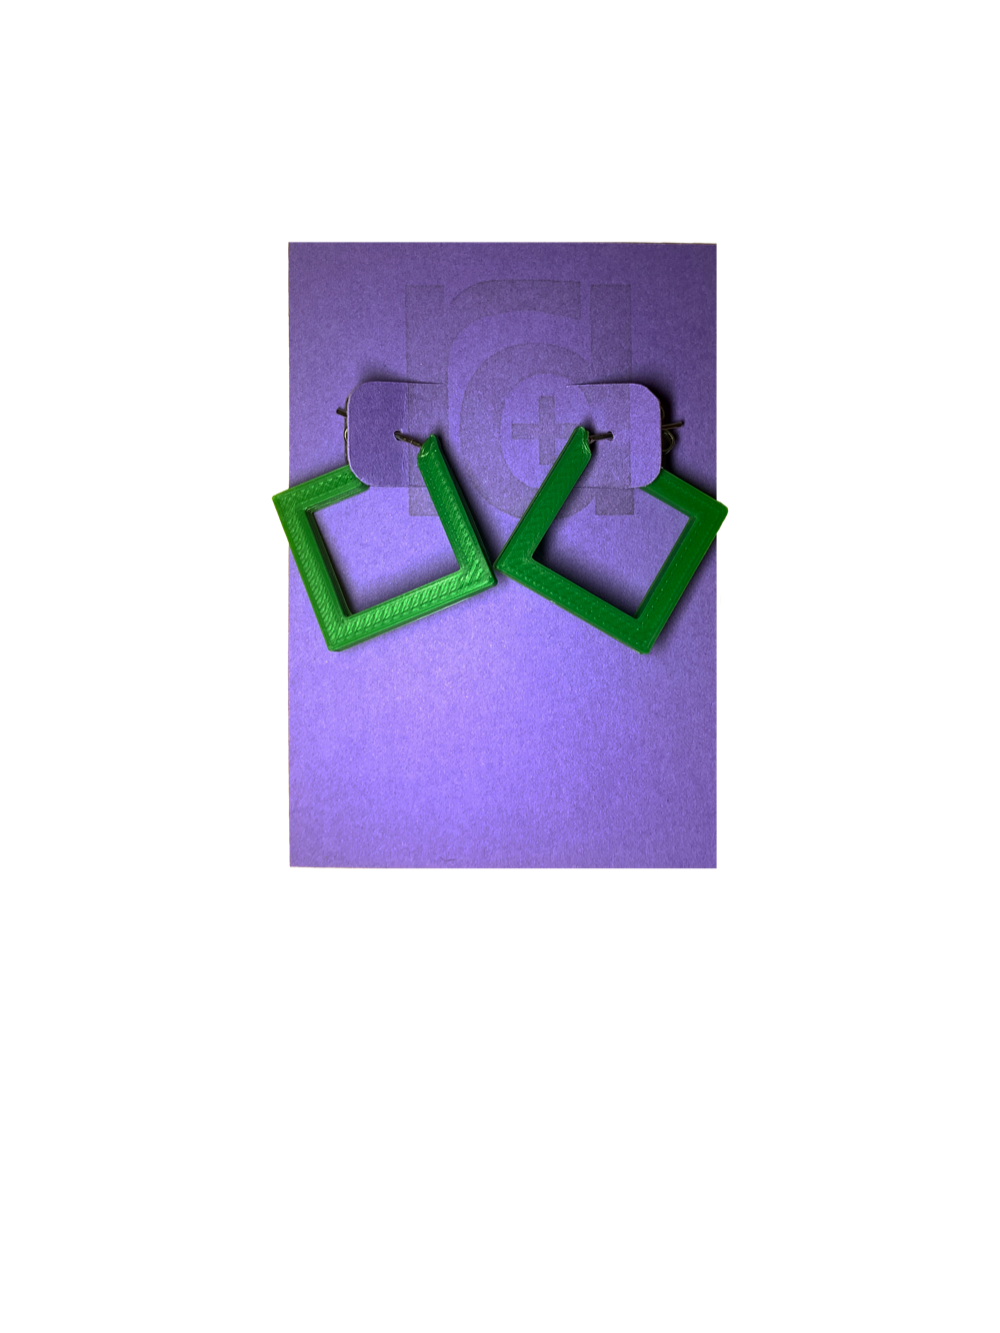 On a bight purple R+D card are two 3D printed earrings. They are hoops that are in the shape of squares. These are printed in a bright kelly green. 